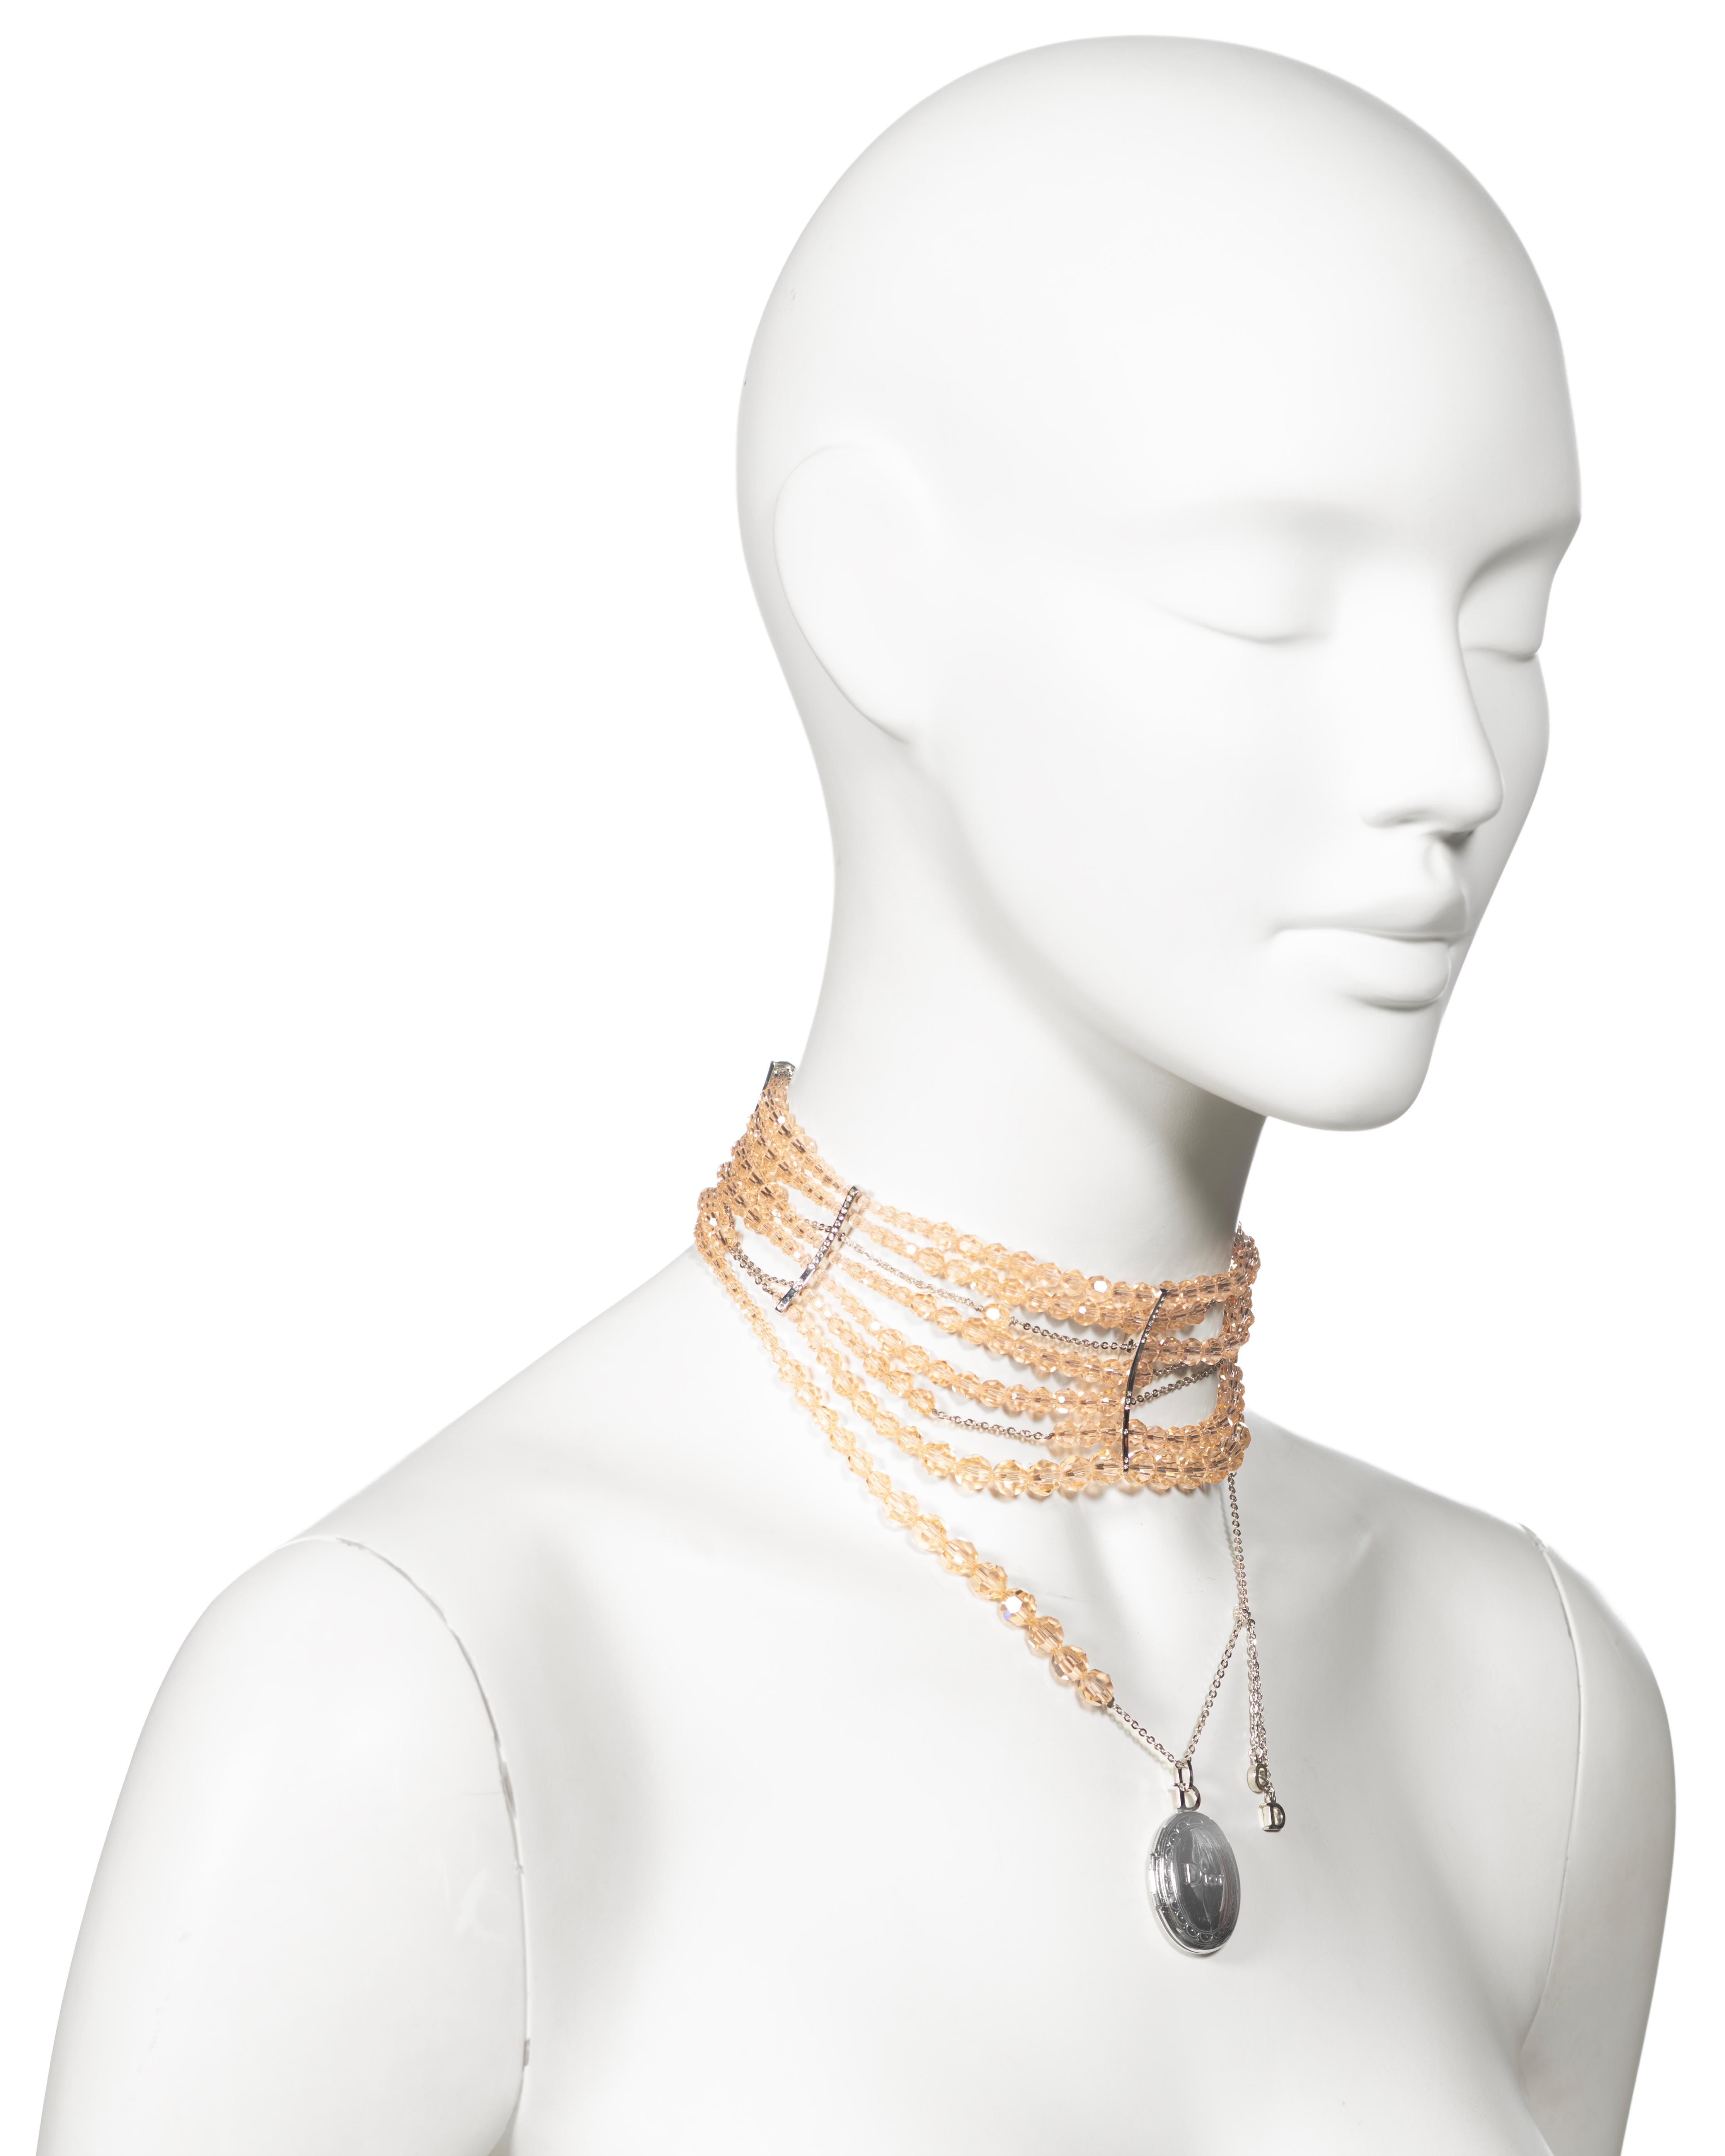 Christian Dior by John Galliano Distressed Peach Bead Choker Necklace, c. 2004 For Sale 3